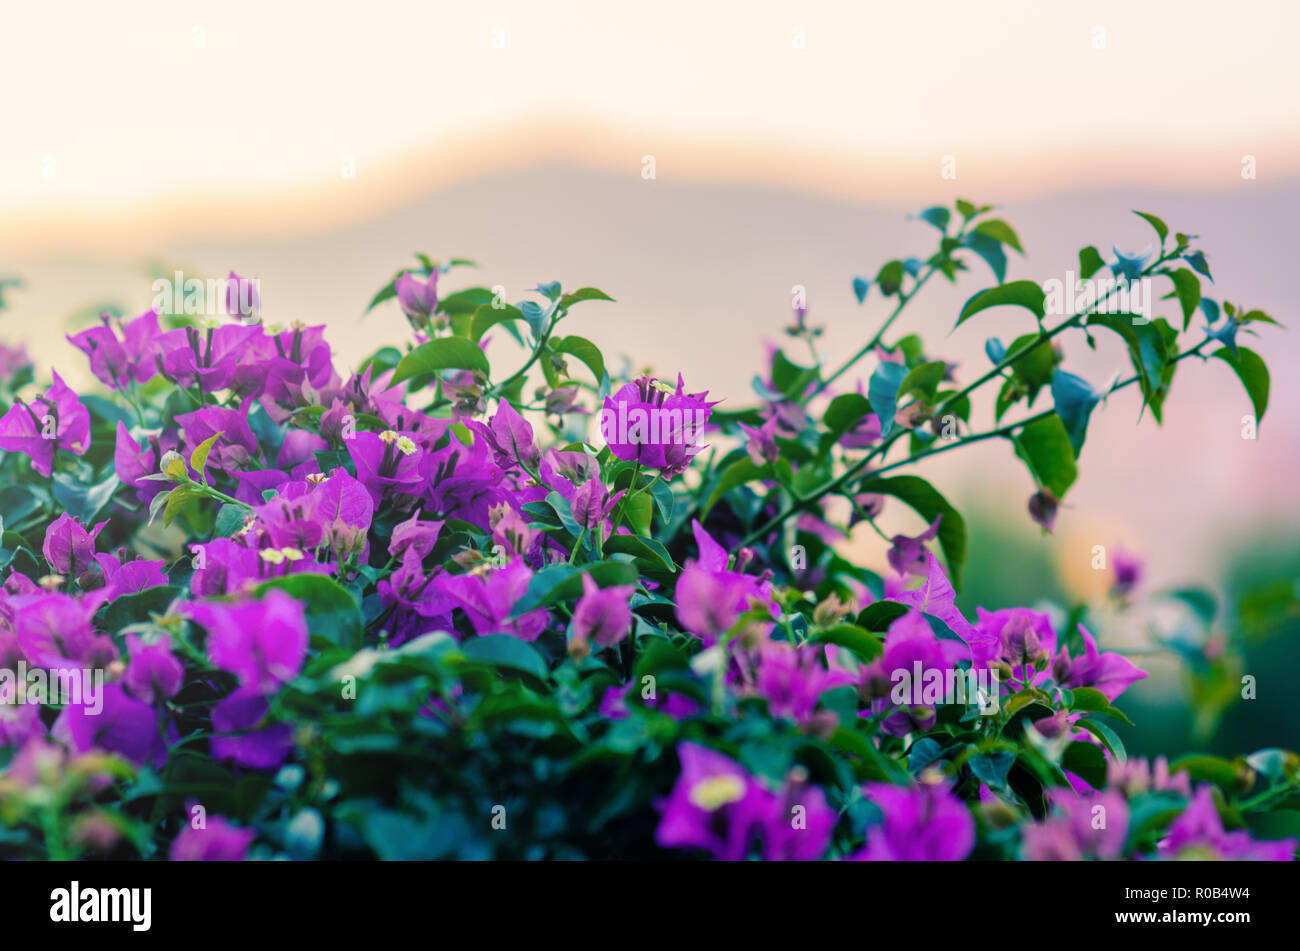 Purple flowers growing in mount Montjuic in Barcelona, Spain. Dawn, mountains in the background. Stock Photo